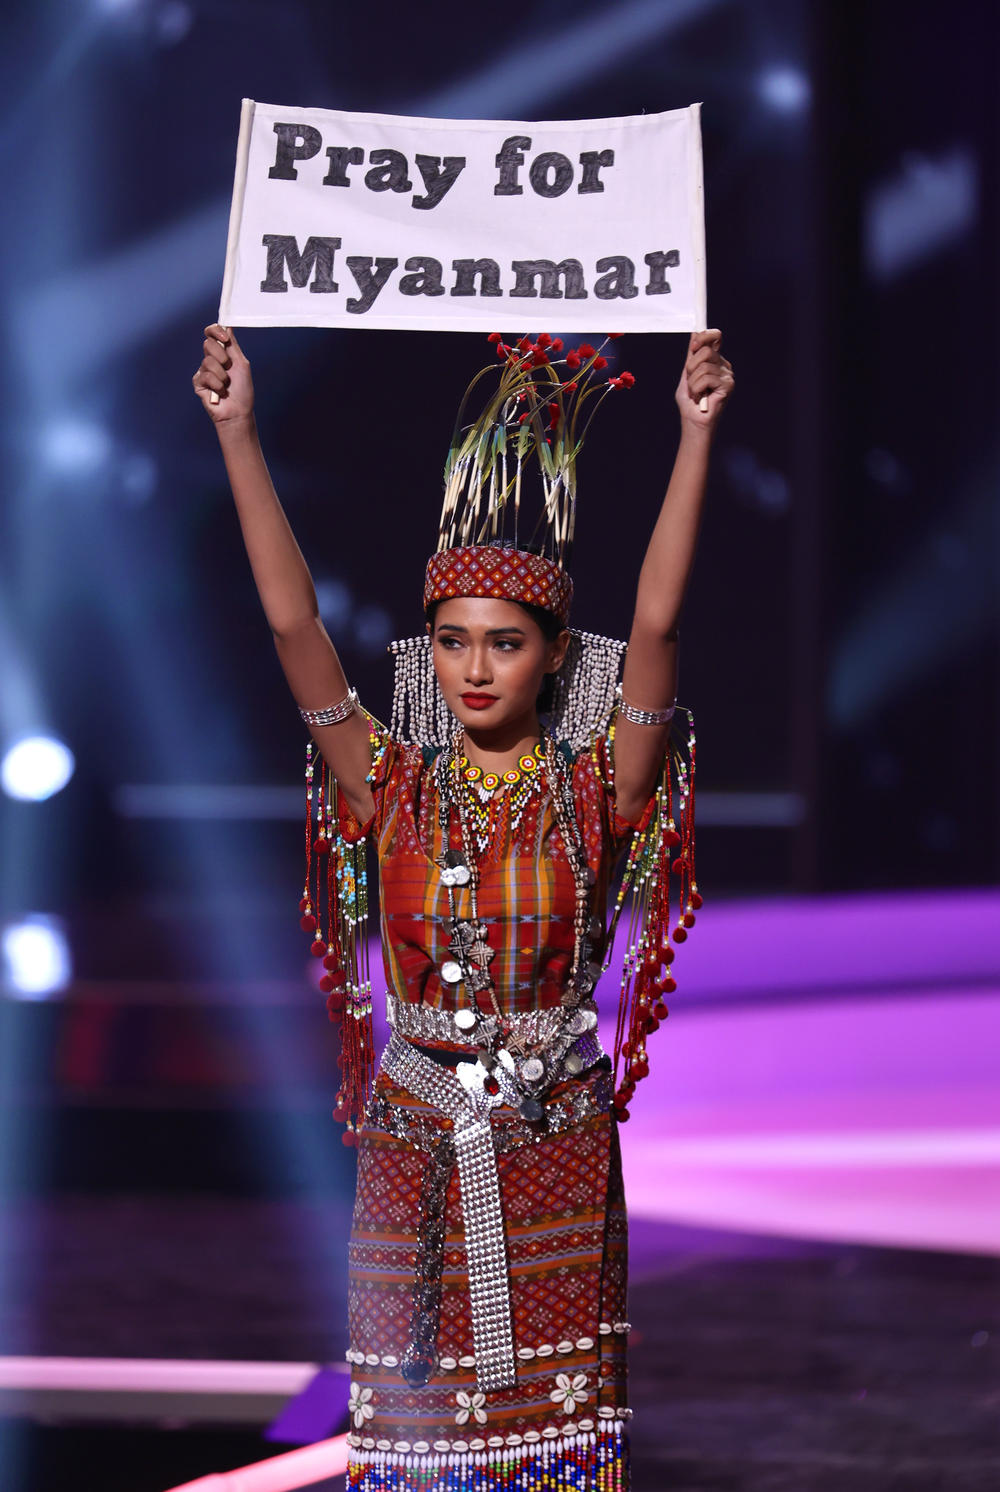 Miss Myanmar Thuzar Wint Lwin appears onstage at the Miss Universe 2021 National Costume Show at Seminole Hard Rock Hotel & Casino on May 13 in Hollywood, Fla.